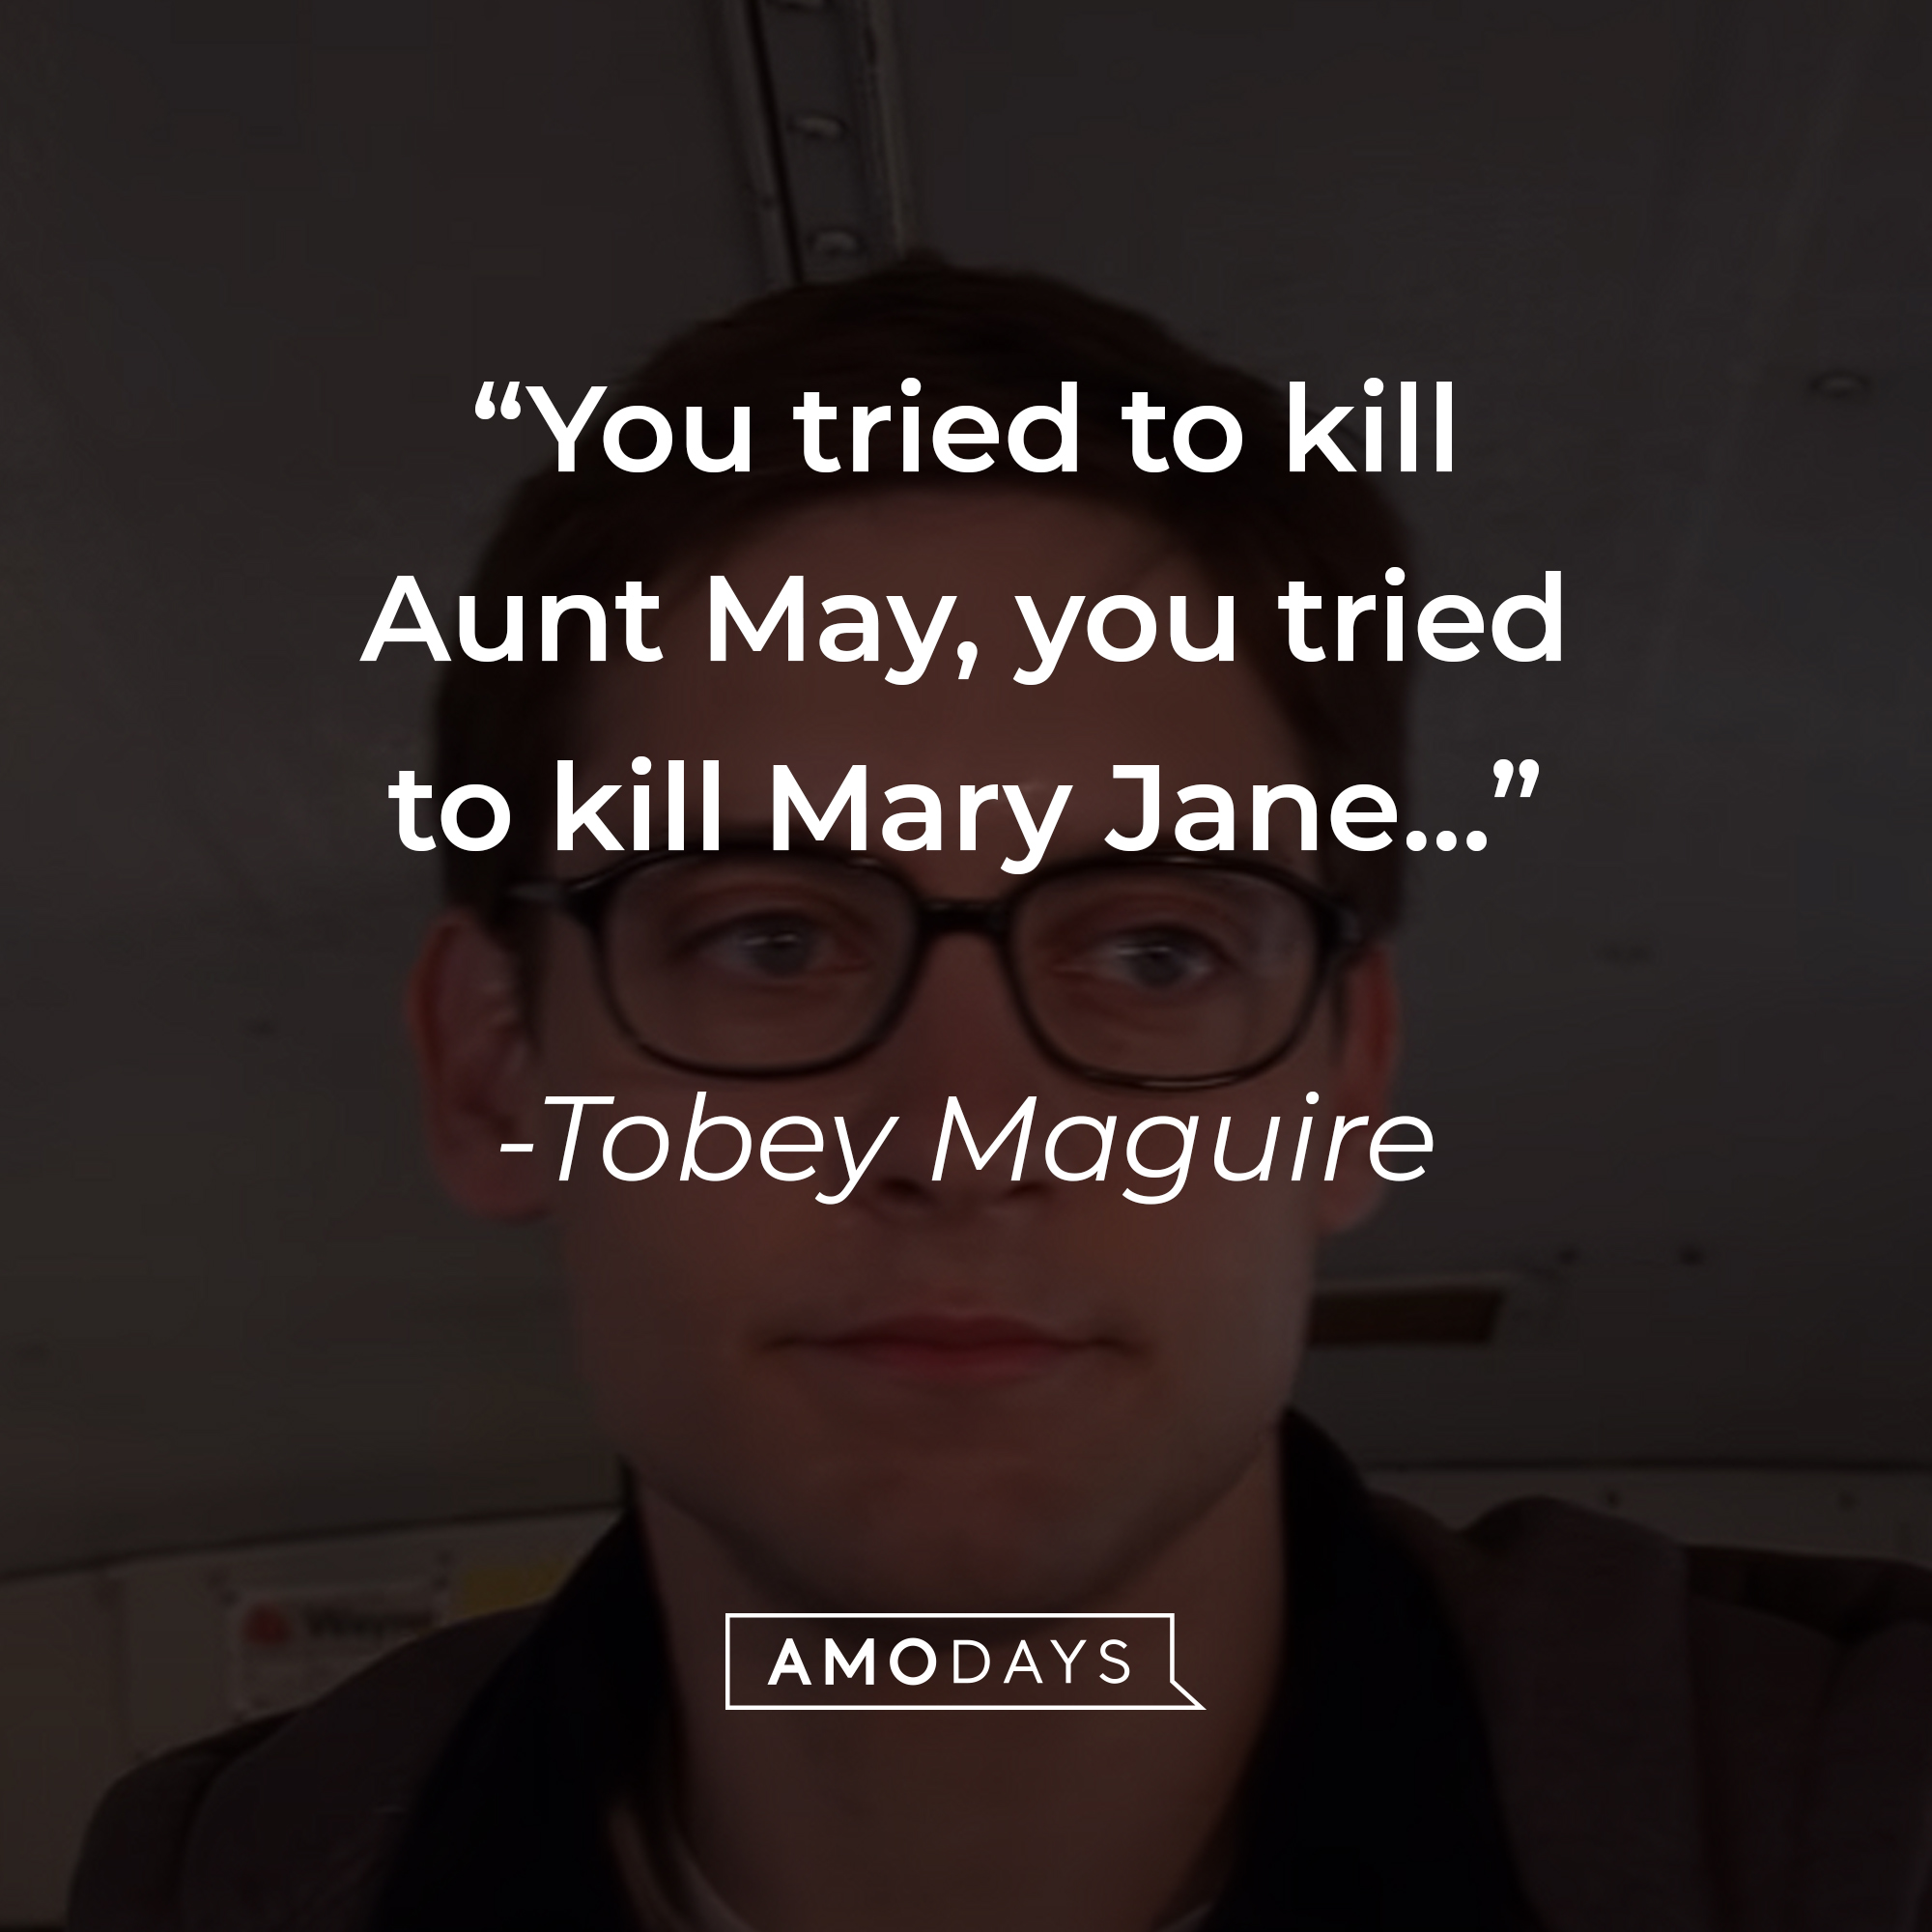 Tobey Maguire's quote: “You tried to kill Aunt May, you tried to kill Mary Jane…” | Source: youtube.com/sonypictures